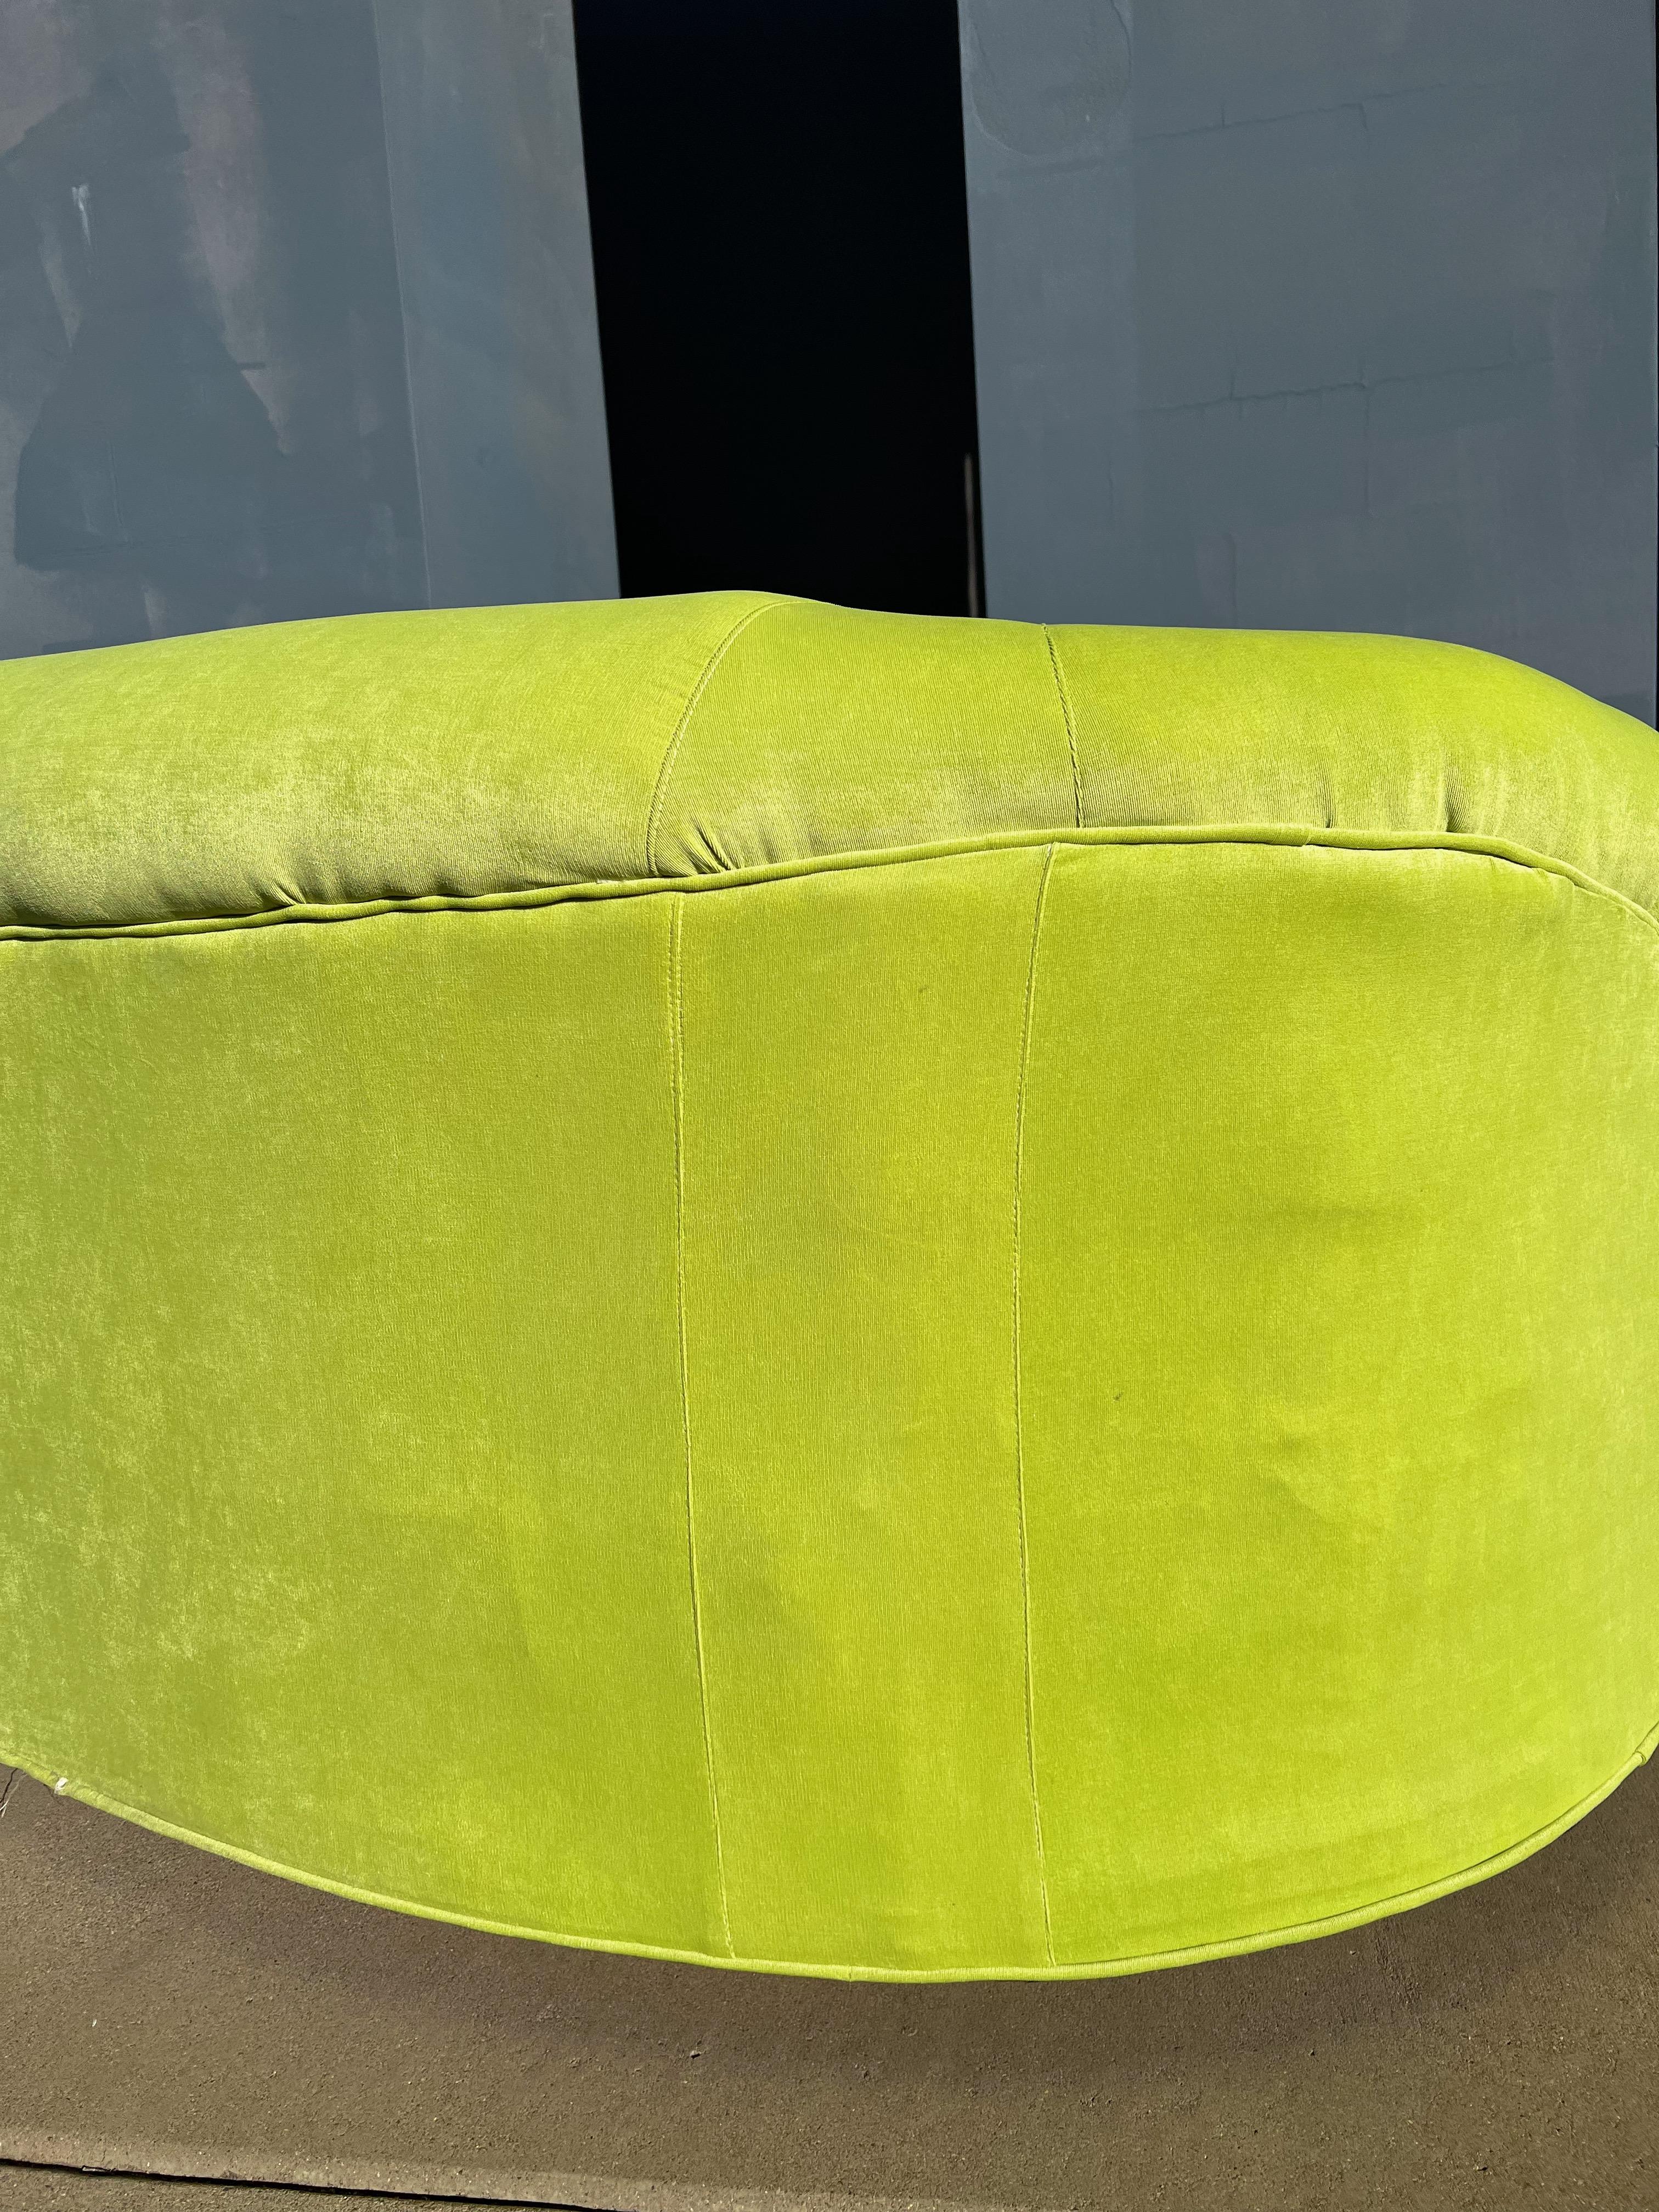 Bright Green Vintage Curved Sofa In Good Condition For Sale In Glendale, AZ